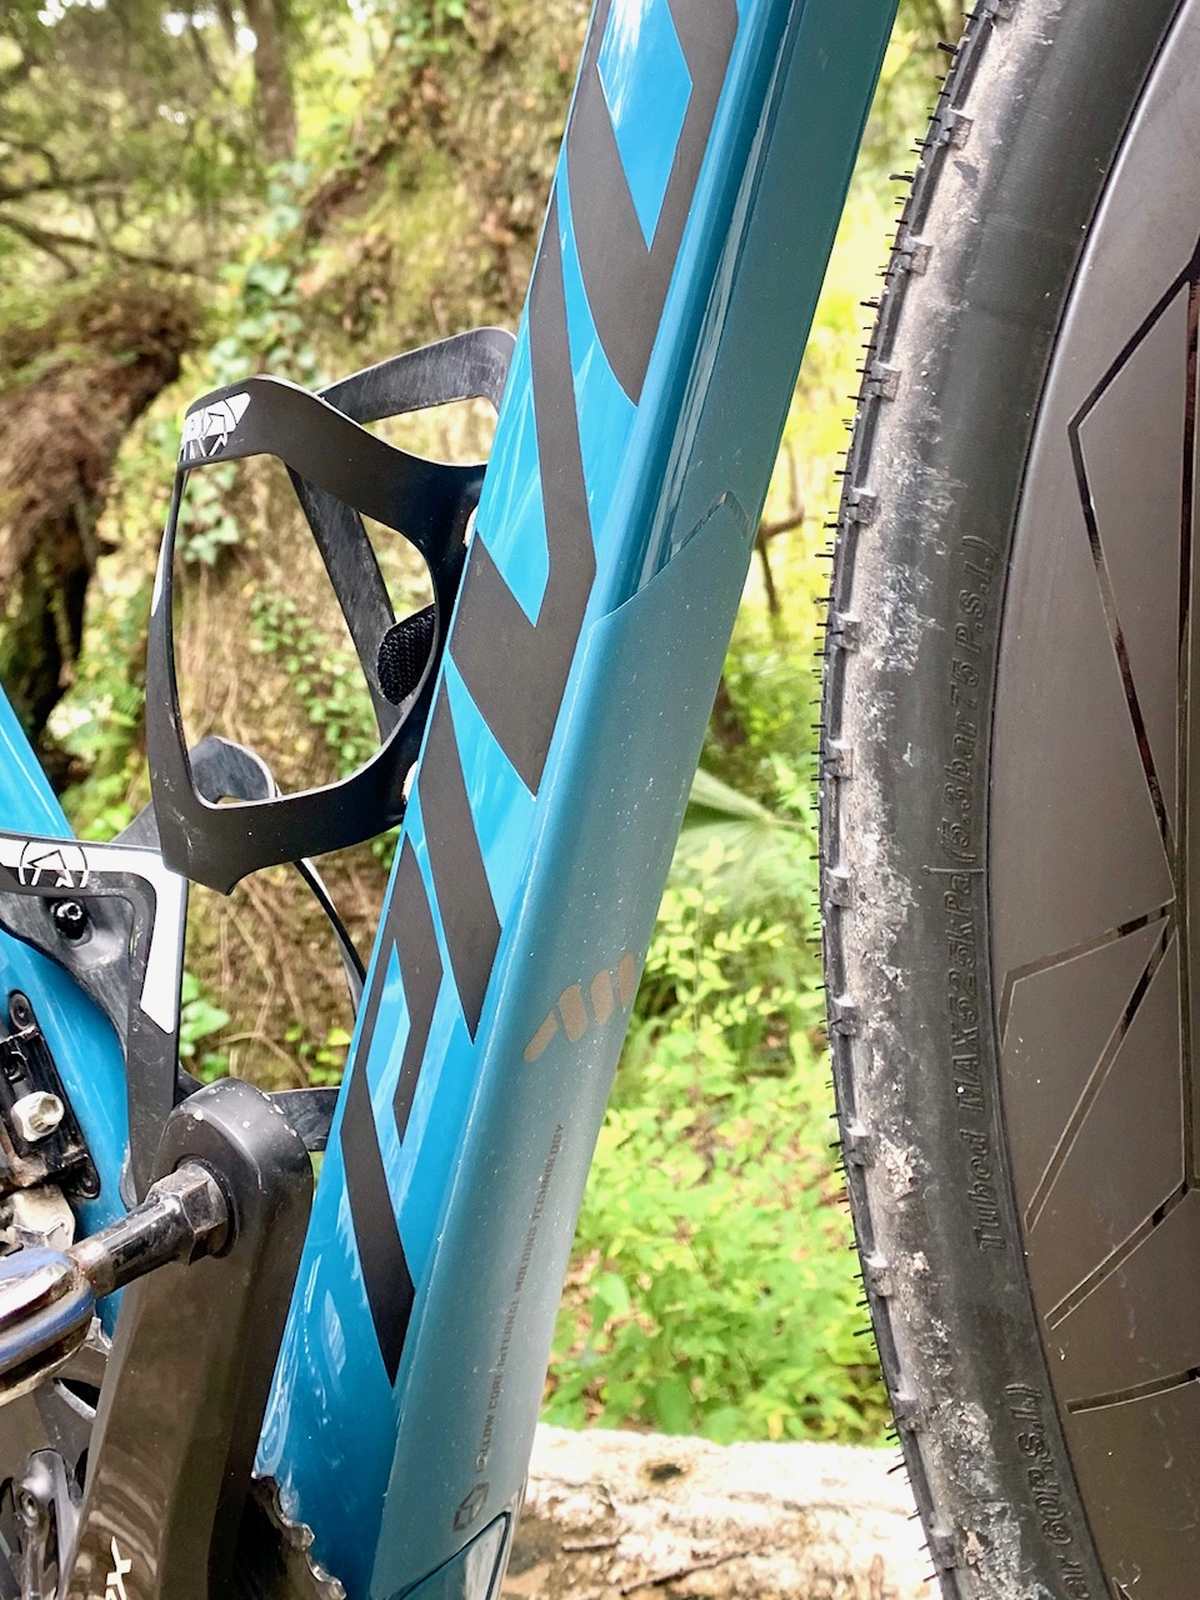 ALL MOUNTAIN STYLE FRAME GUARD